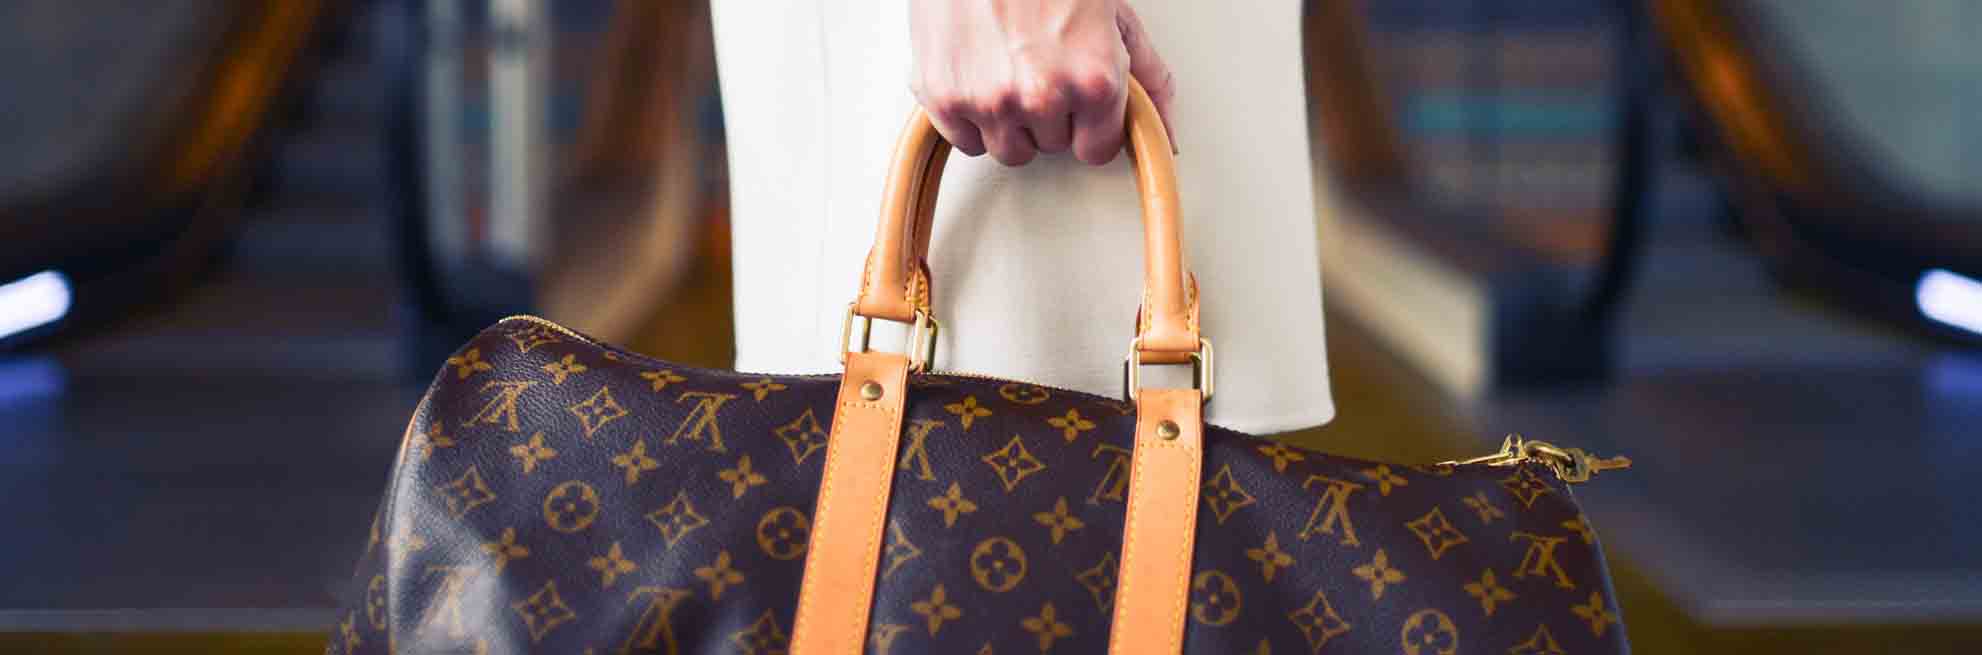 How Can Luxury Brands Deter Counterfeits?